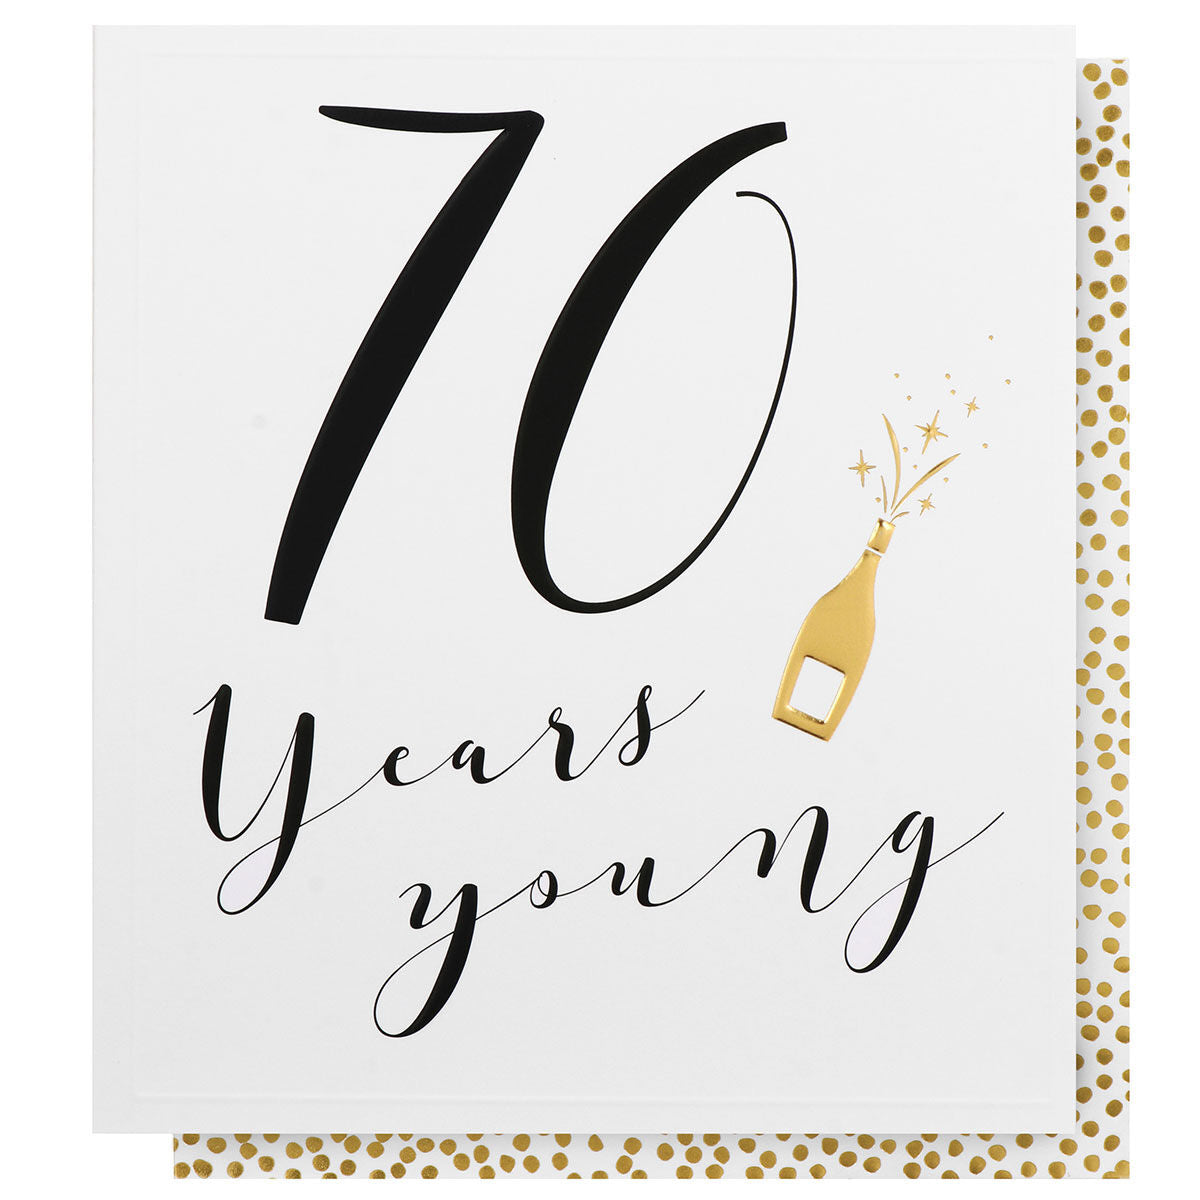 70th Birthday Card - No Frills Golden Champagne Popping